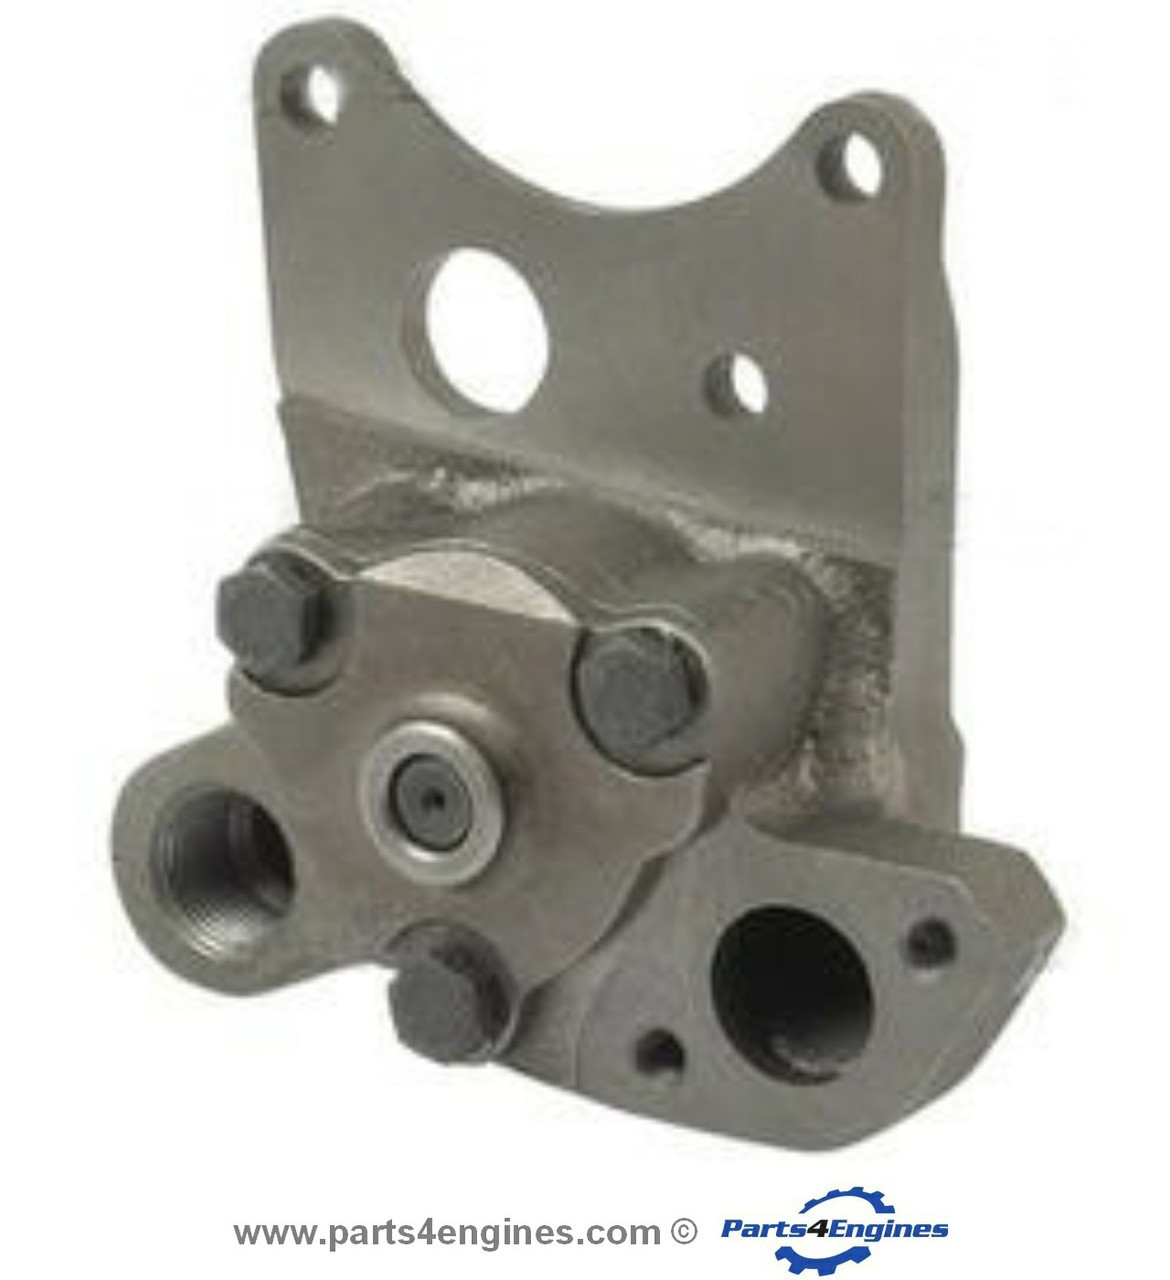 Perkins 4.248 Oil Pump naturally aspirated from parts4engines.com